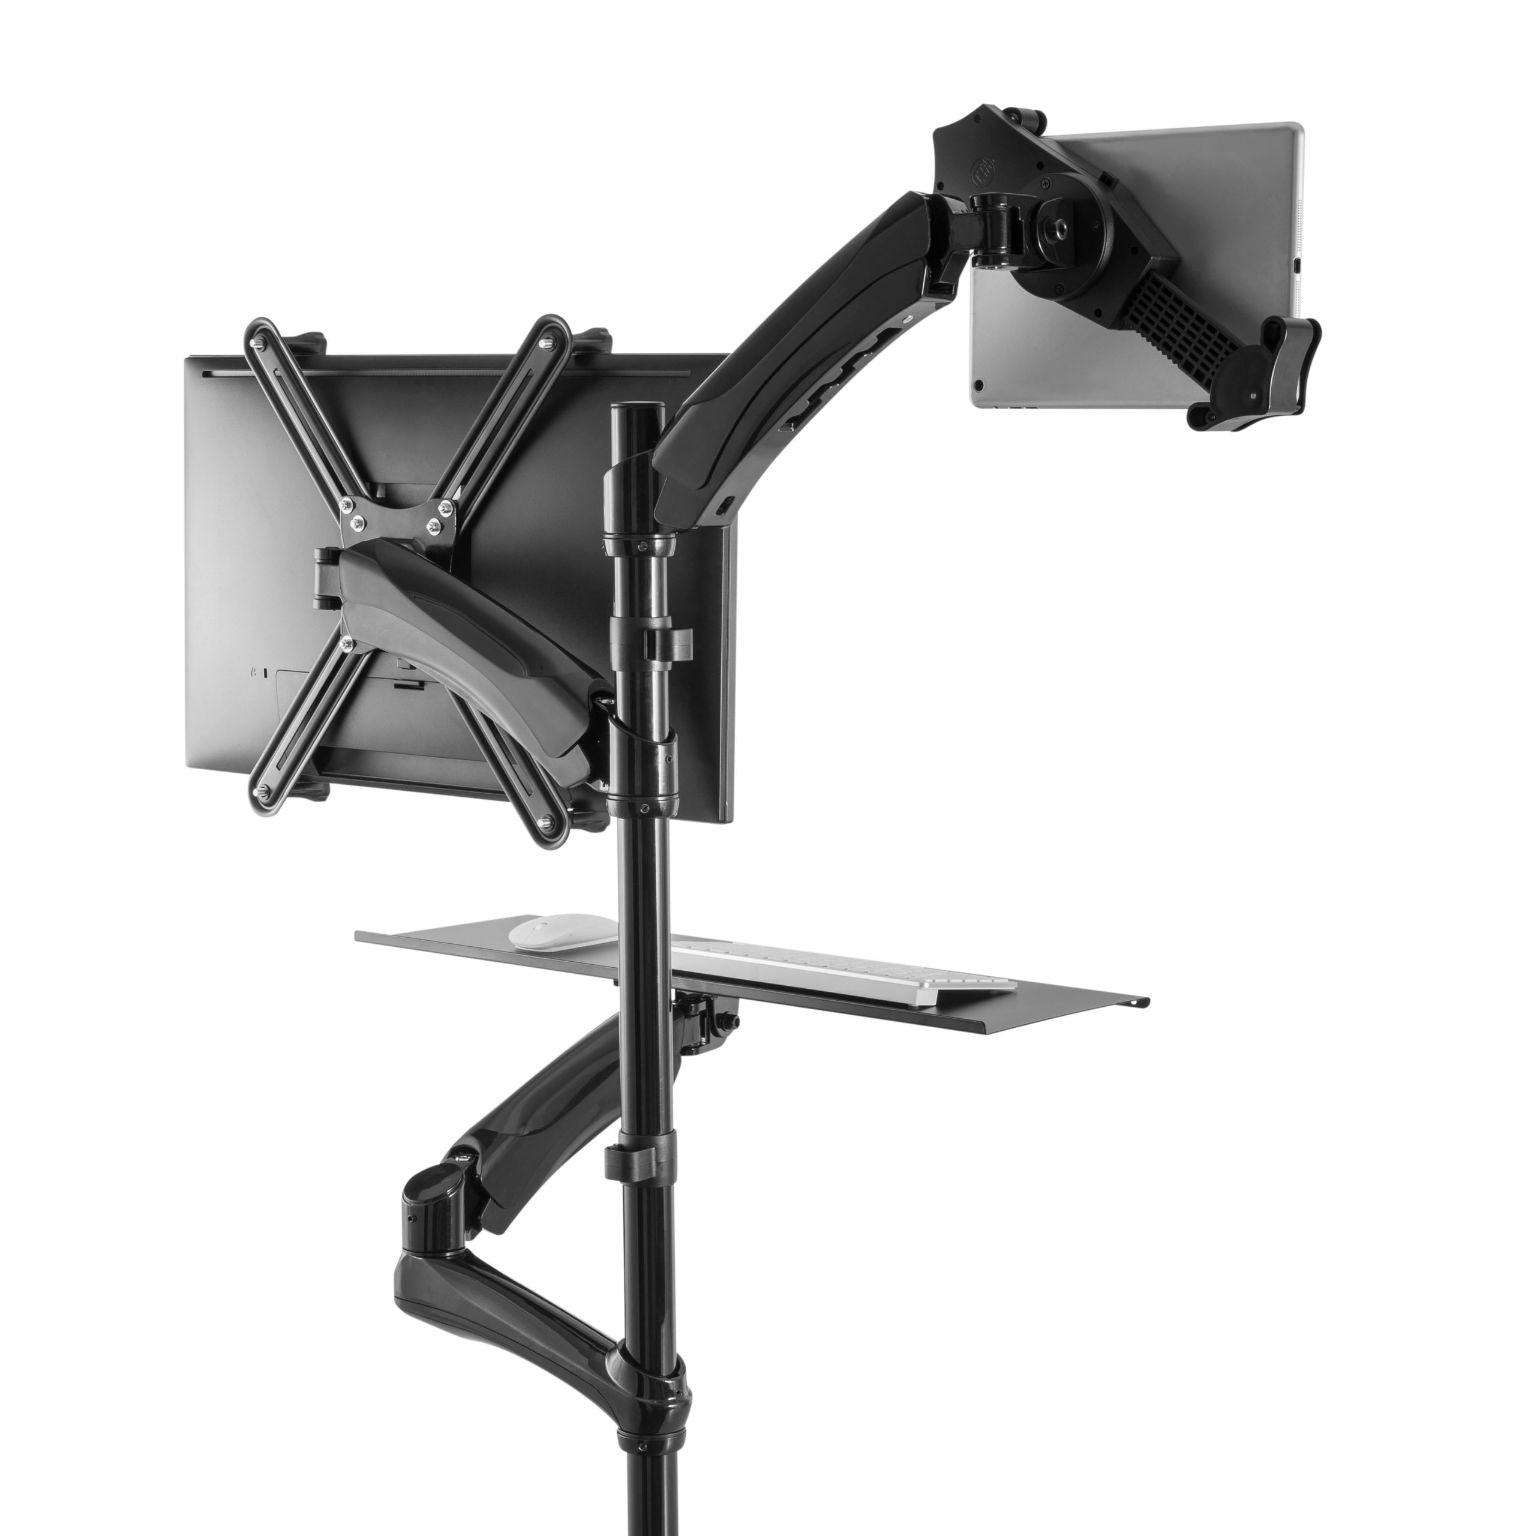 2-in-1 Adjustable Monitor and Tablet Mount Stand with Keyboard Tray for 7 - 13 inch Tablets & 13 - 27 inch Monitors or Large Tablets